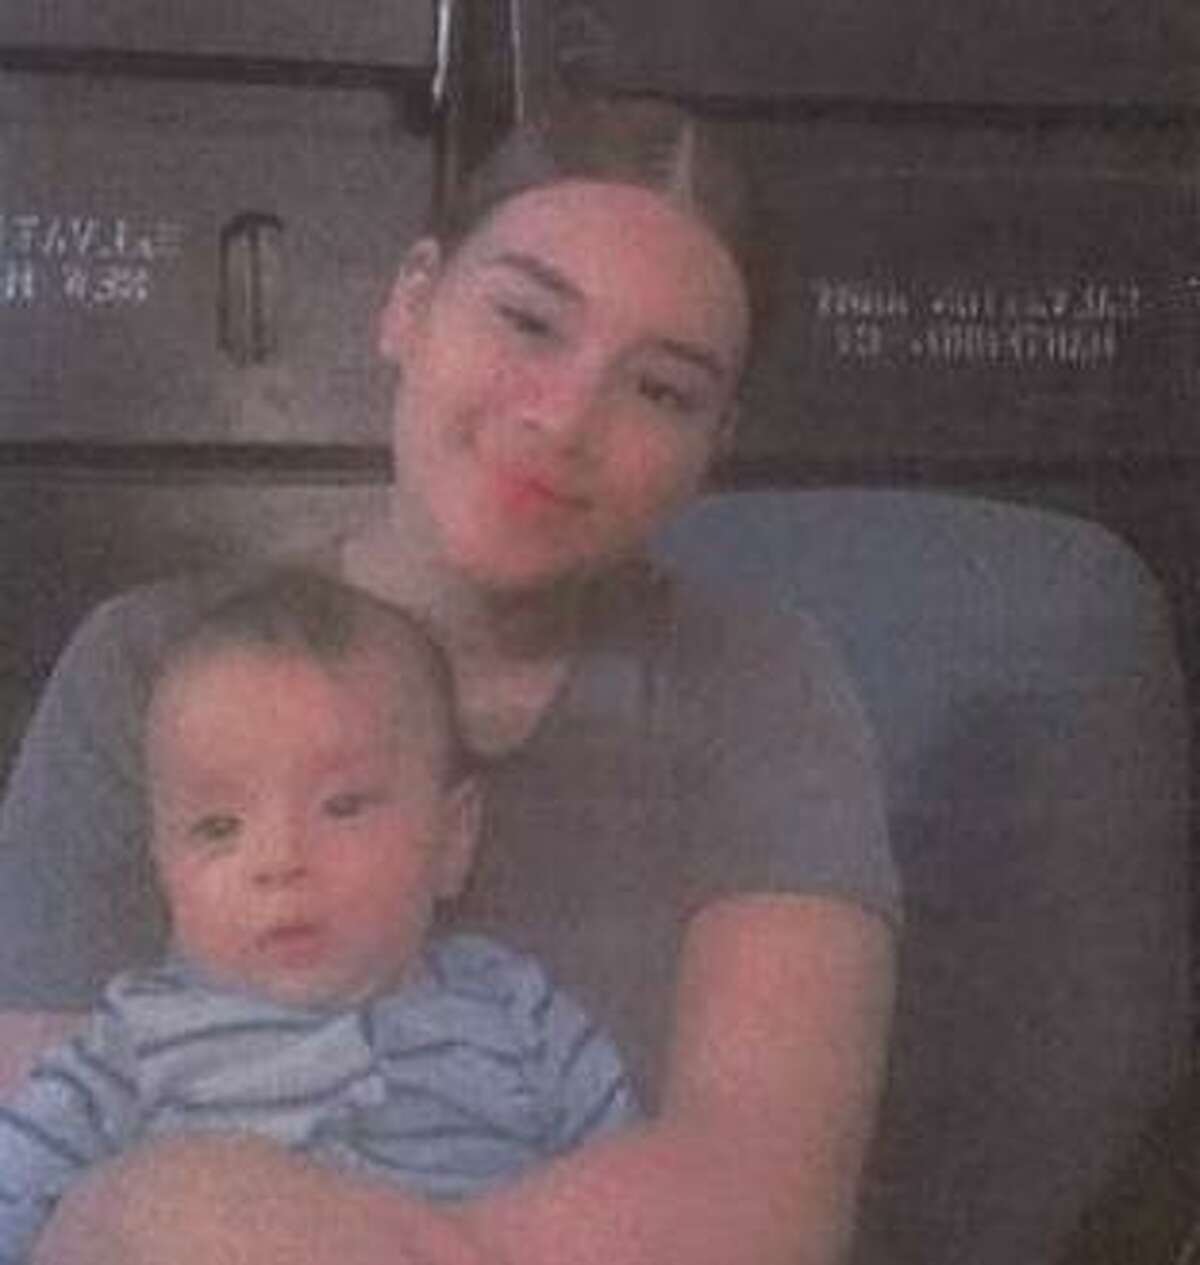 Emily Benitez, 15, and her 5-month-old son Oliver Ortiz were both reported missing on July 27 by the family’s case worker.